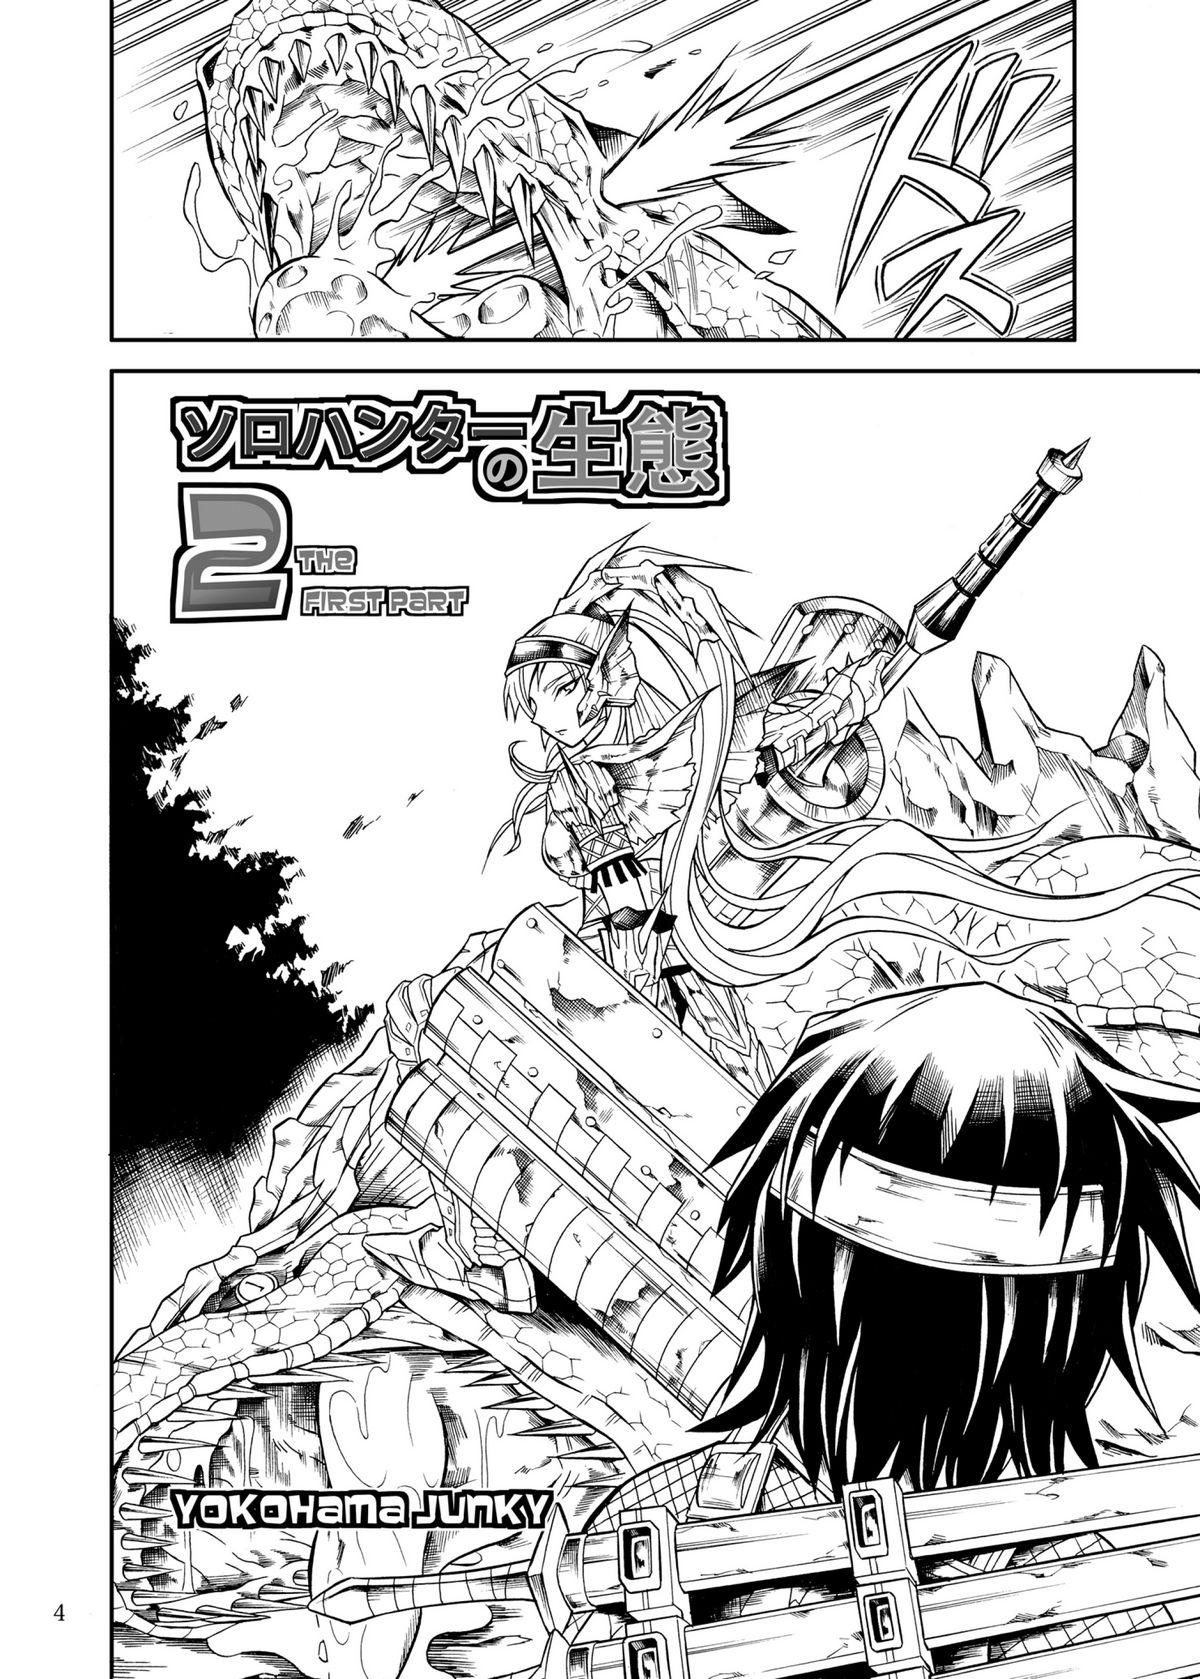 Old Young Solo Hunter no Seitai 2 the first part - Monster hunter Free Amatuer Porn - Page 4